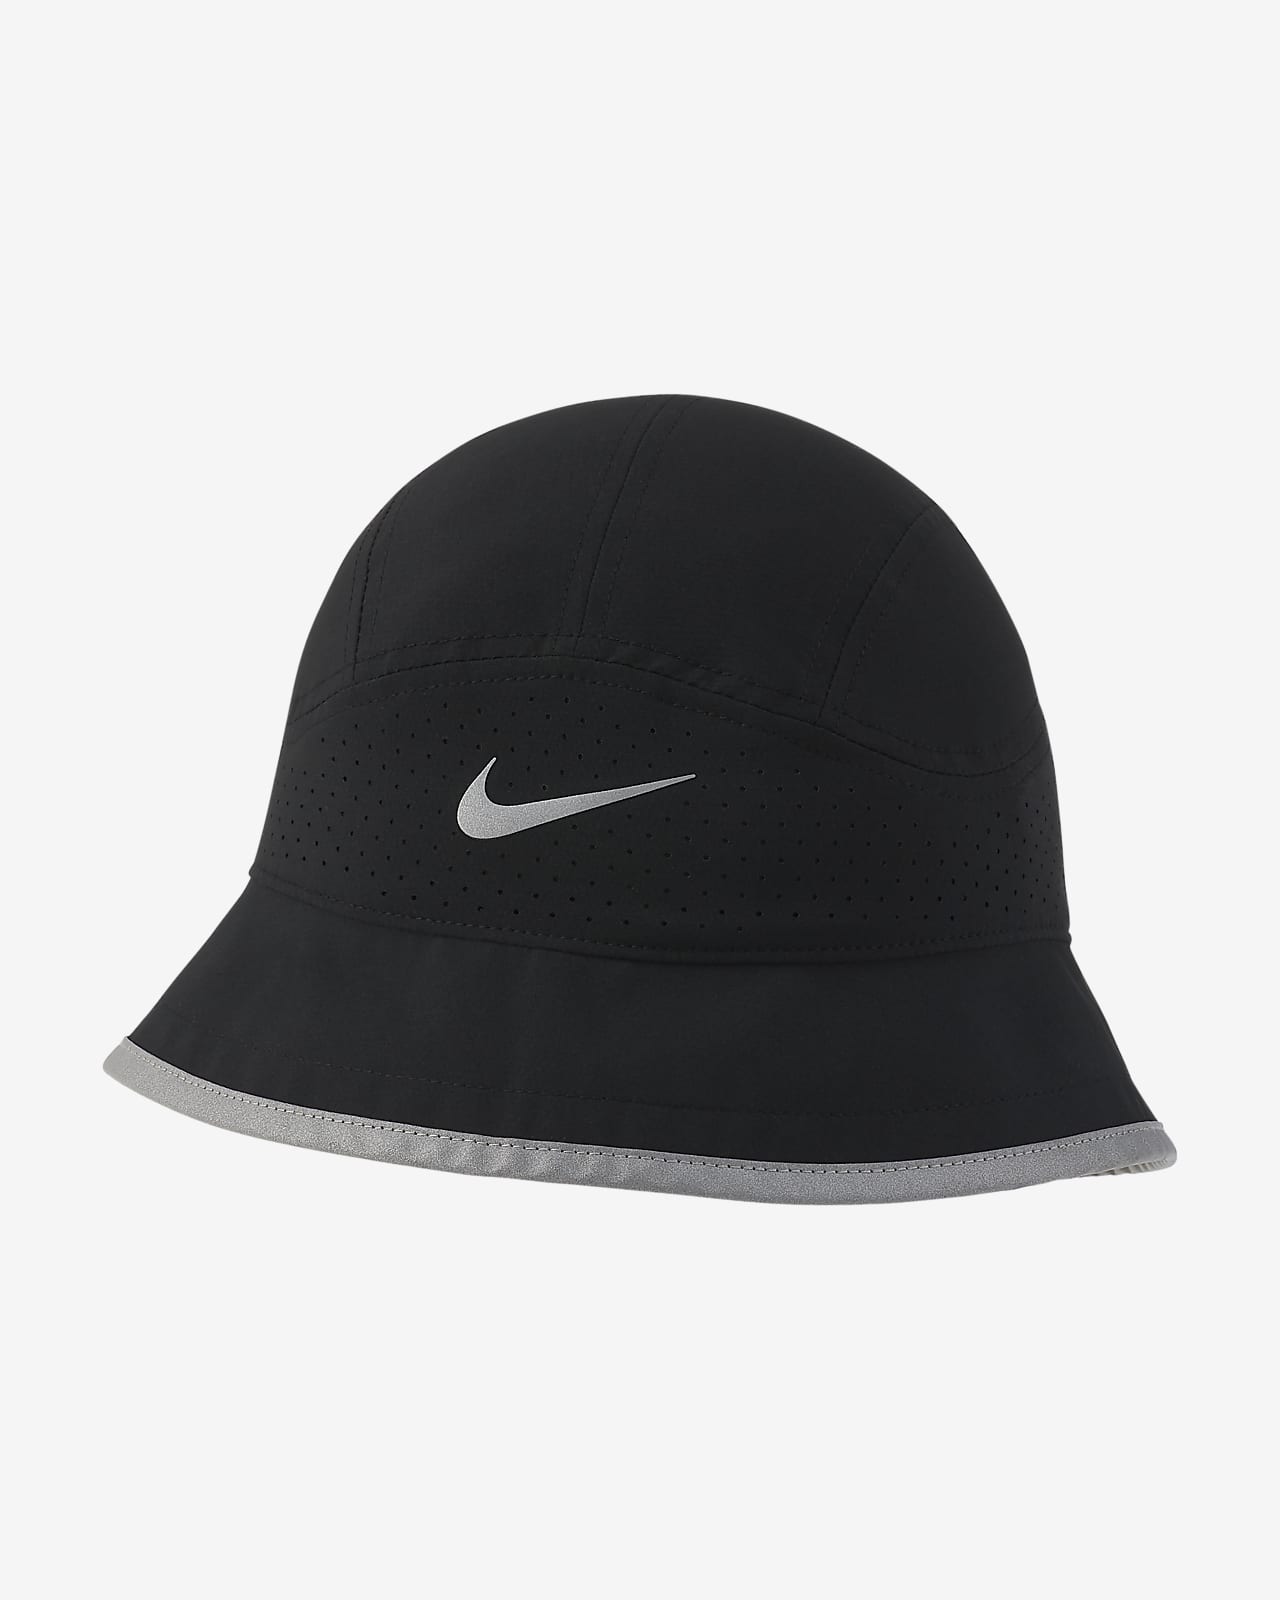 Nike Dri-FIT Perforated Running Bucket Hat